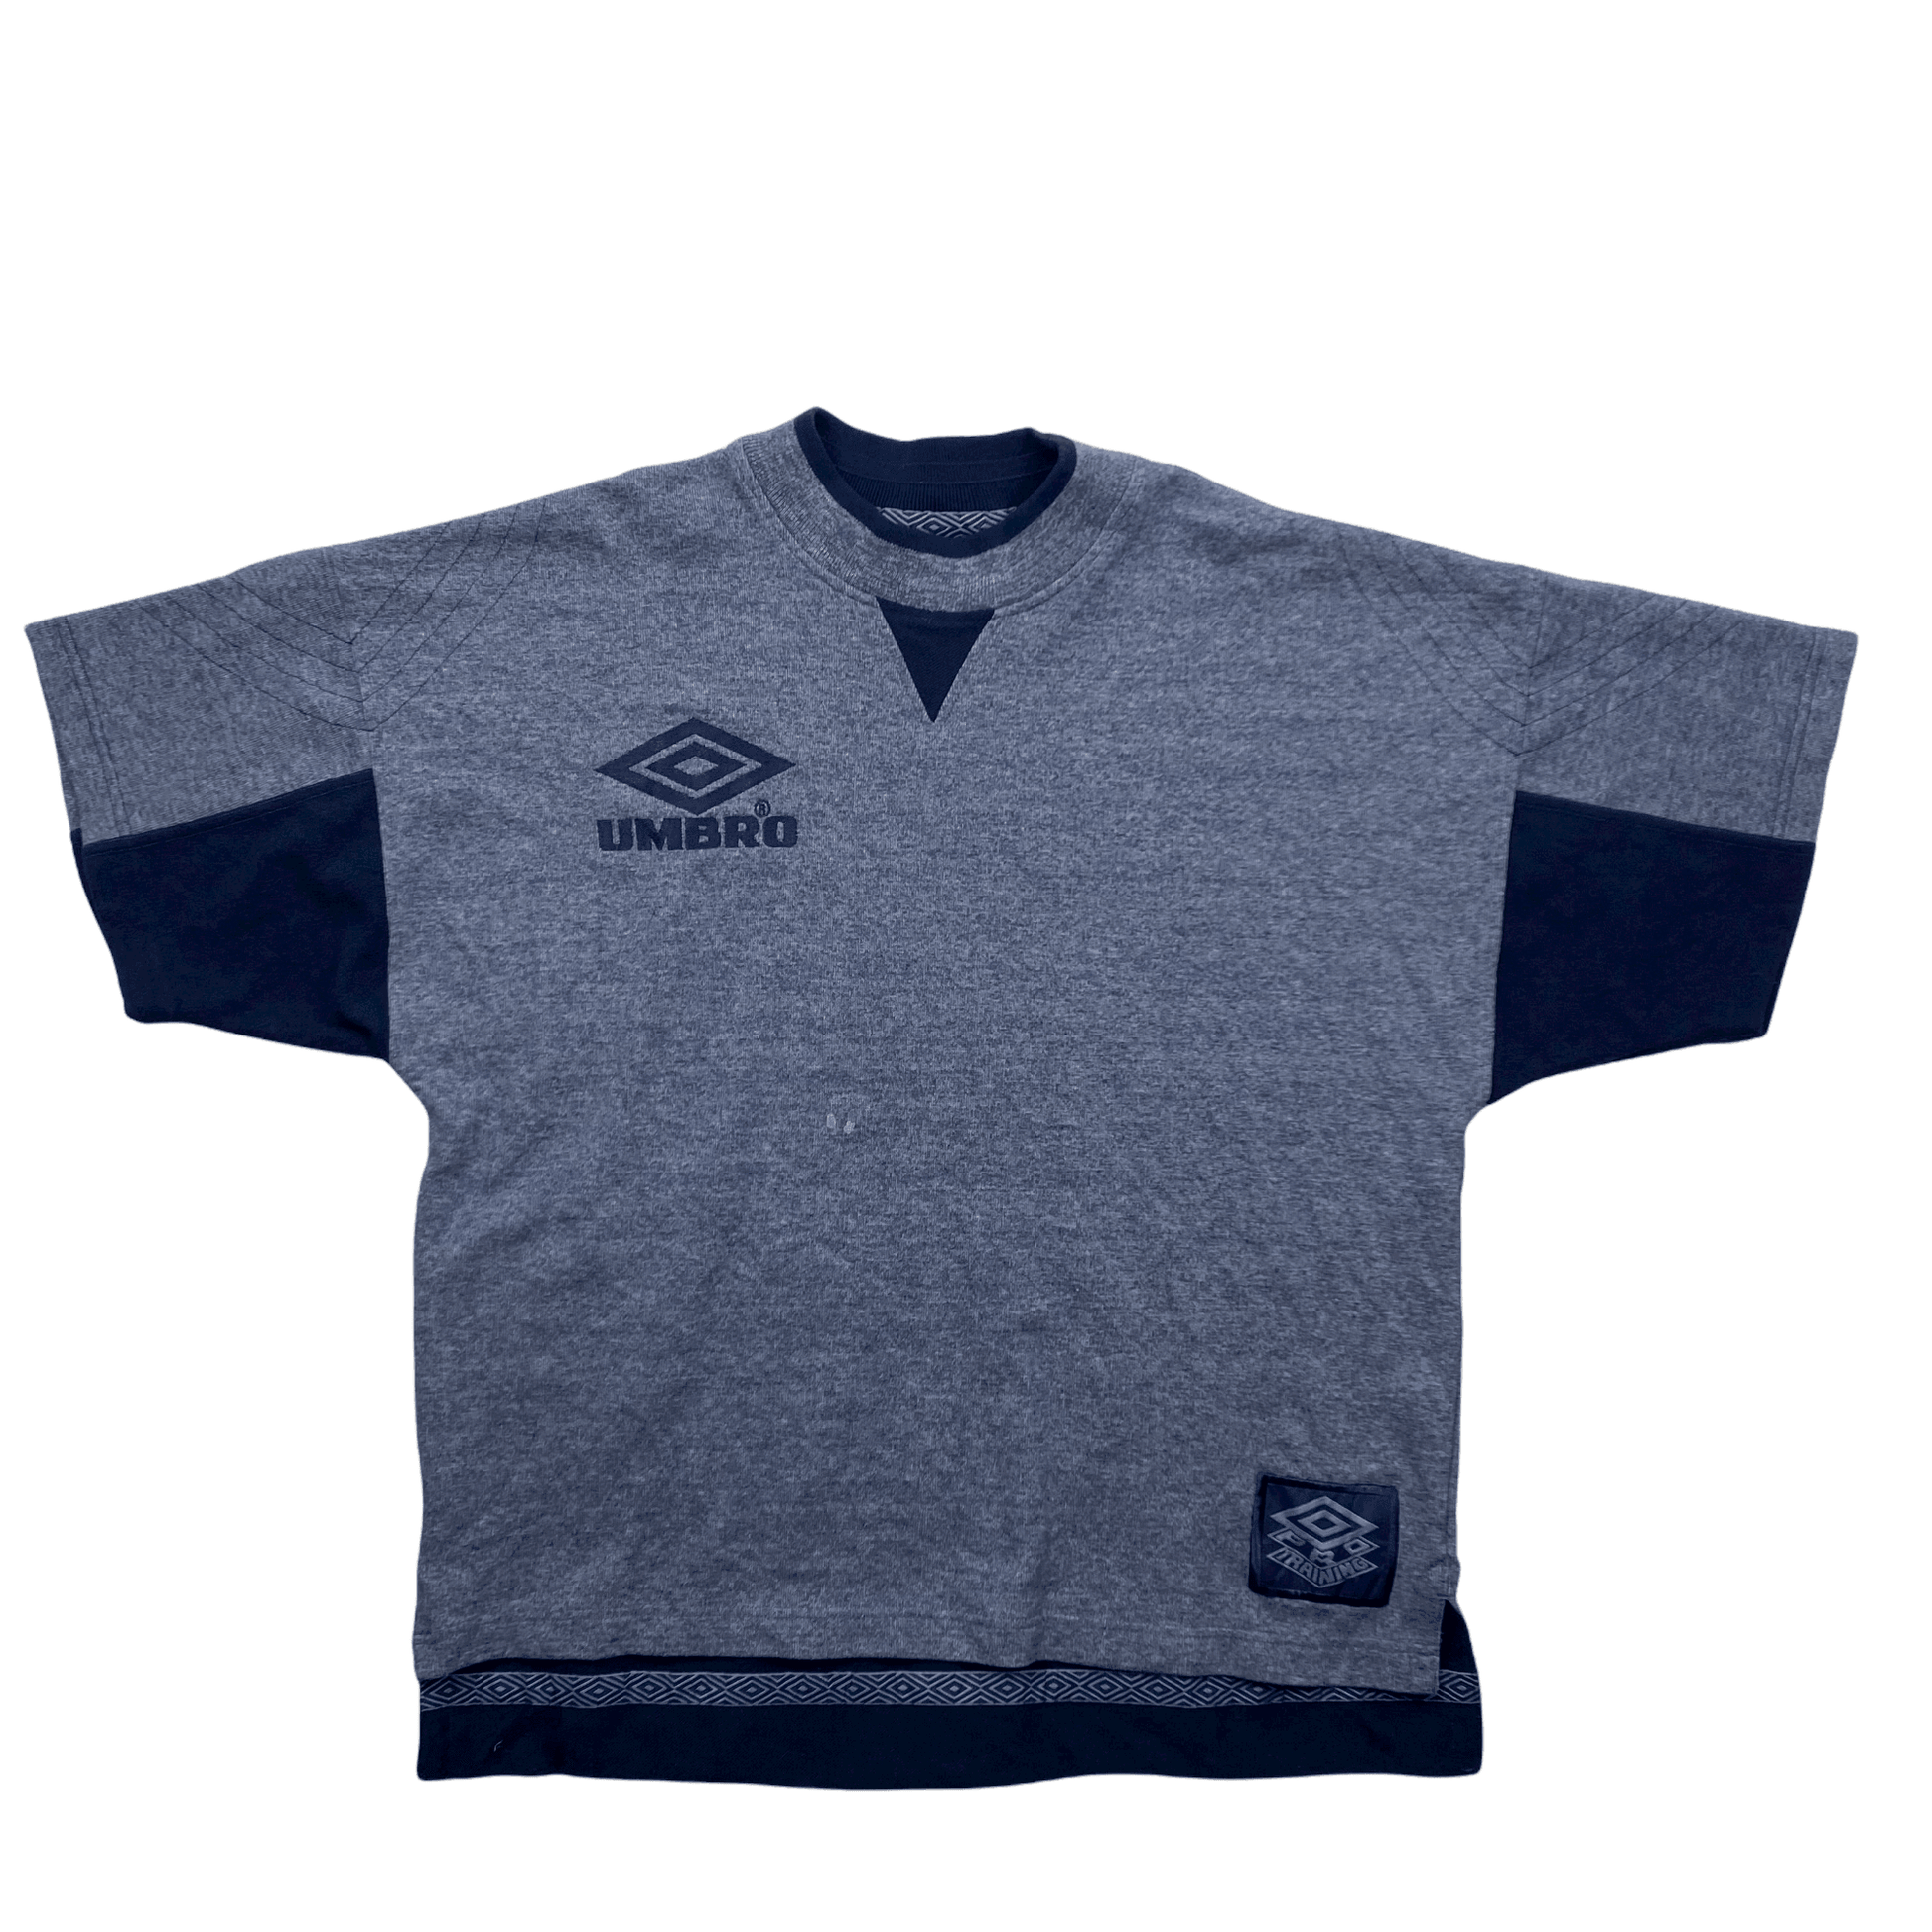 Vintage 90s Blue Umbro Spell-Out Heavy Tee - Large - The Streetwear Studio